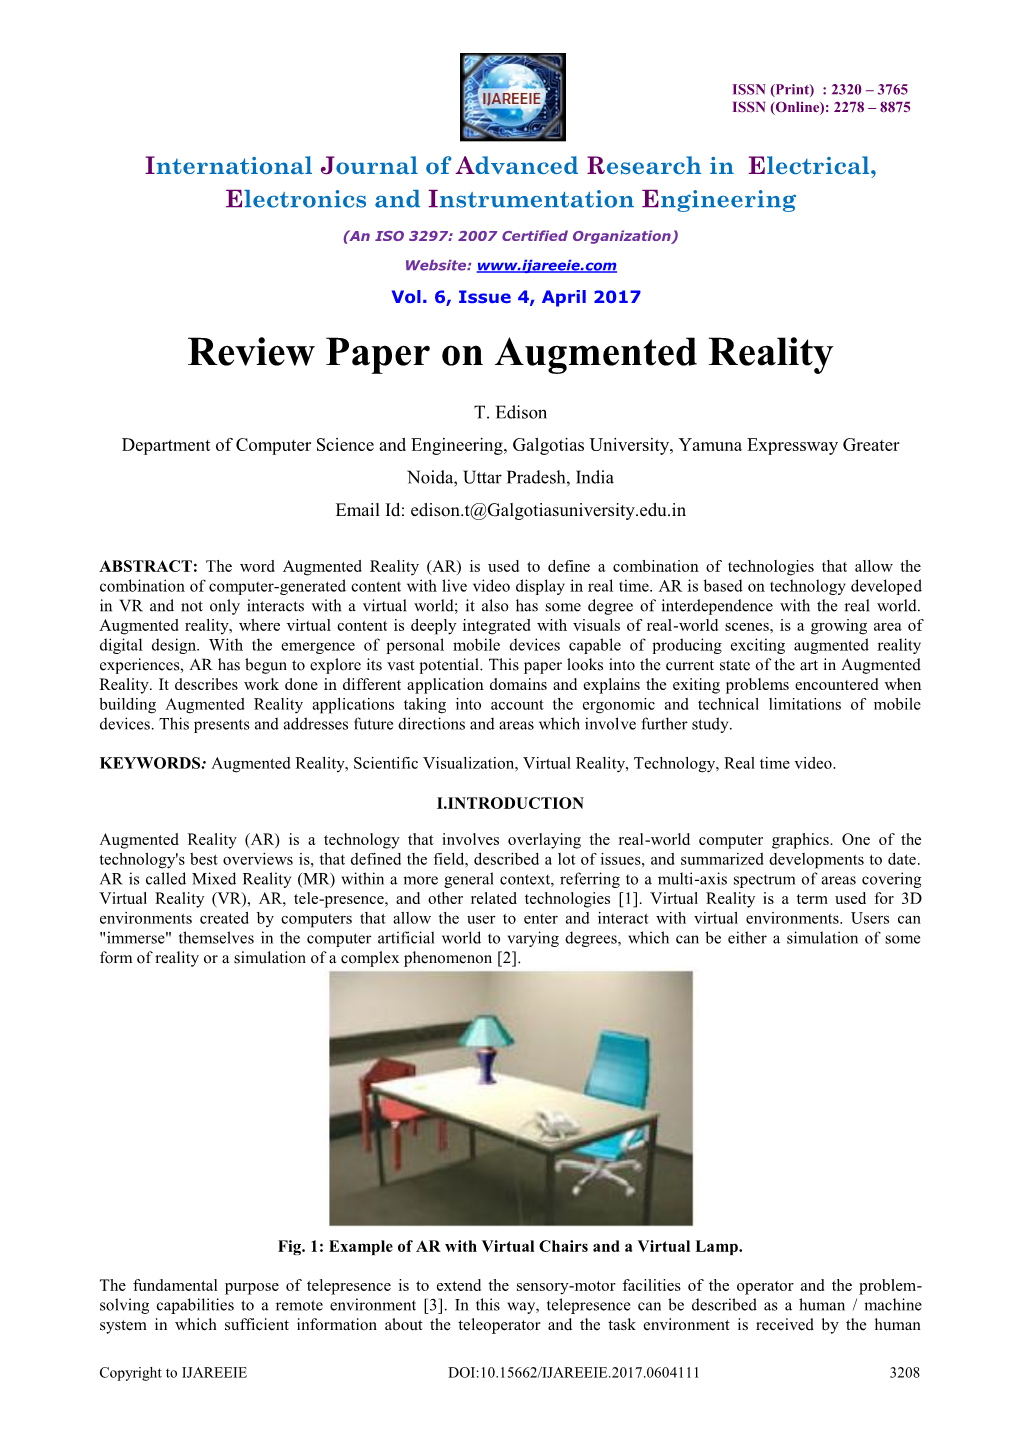 Review Paper on Augmented Reality